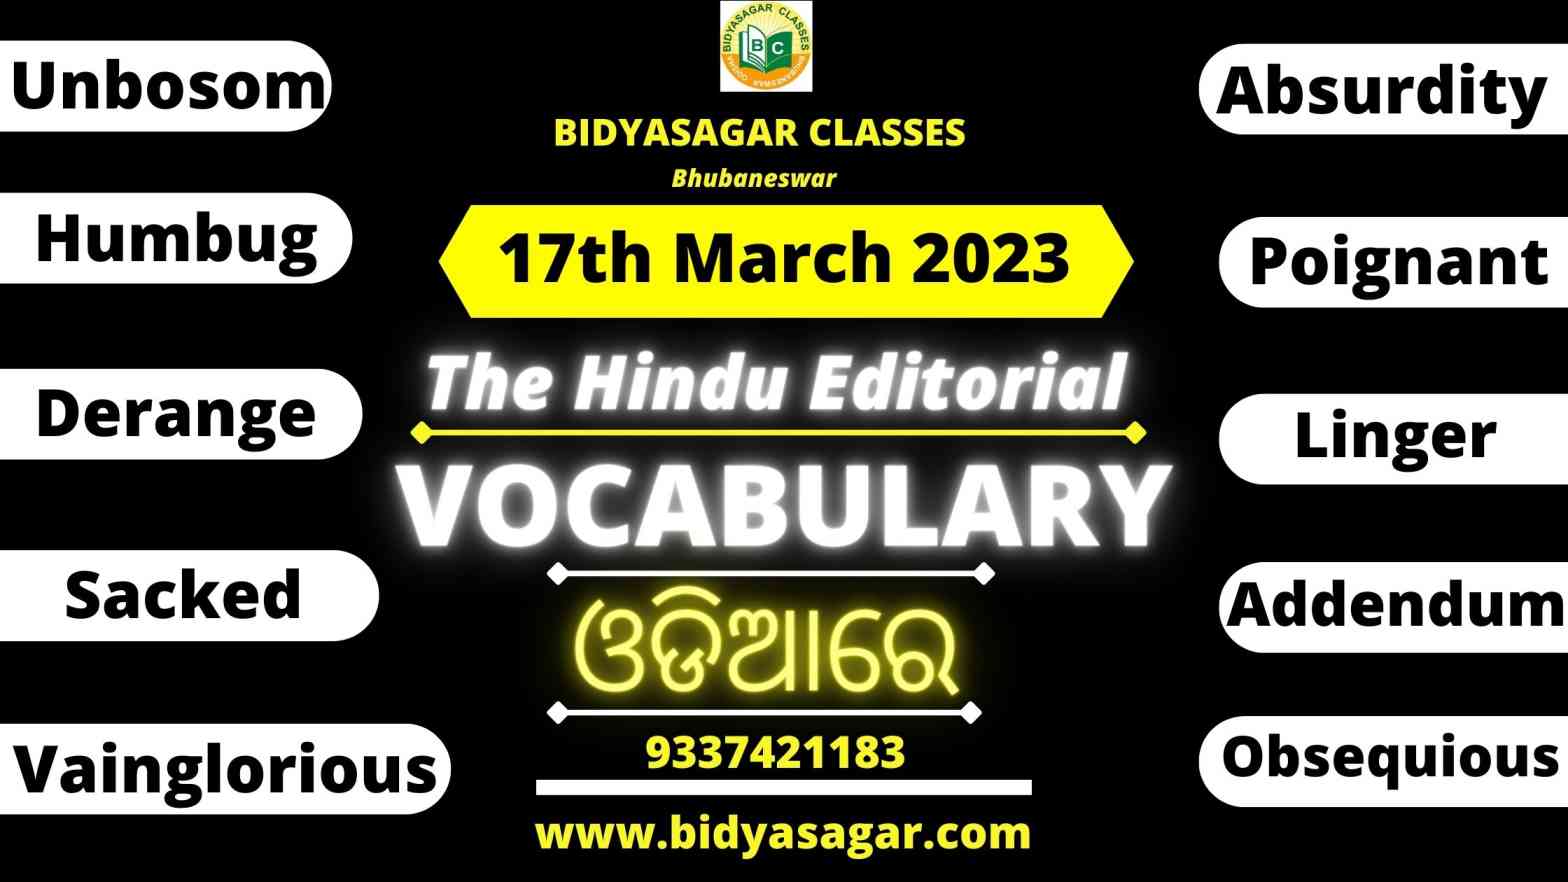 The Hindu Editorial Vocabulary of 17th March 2023